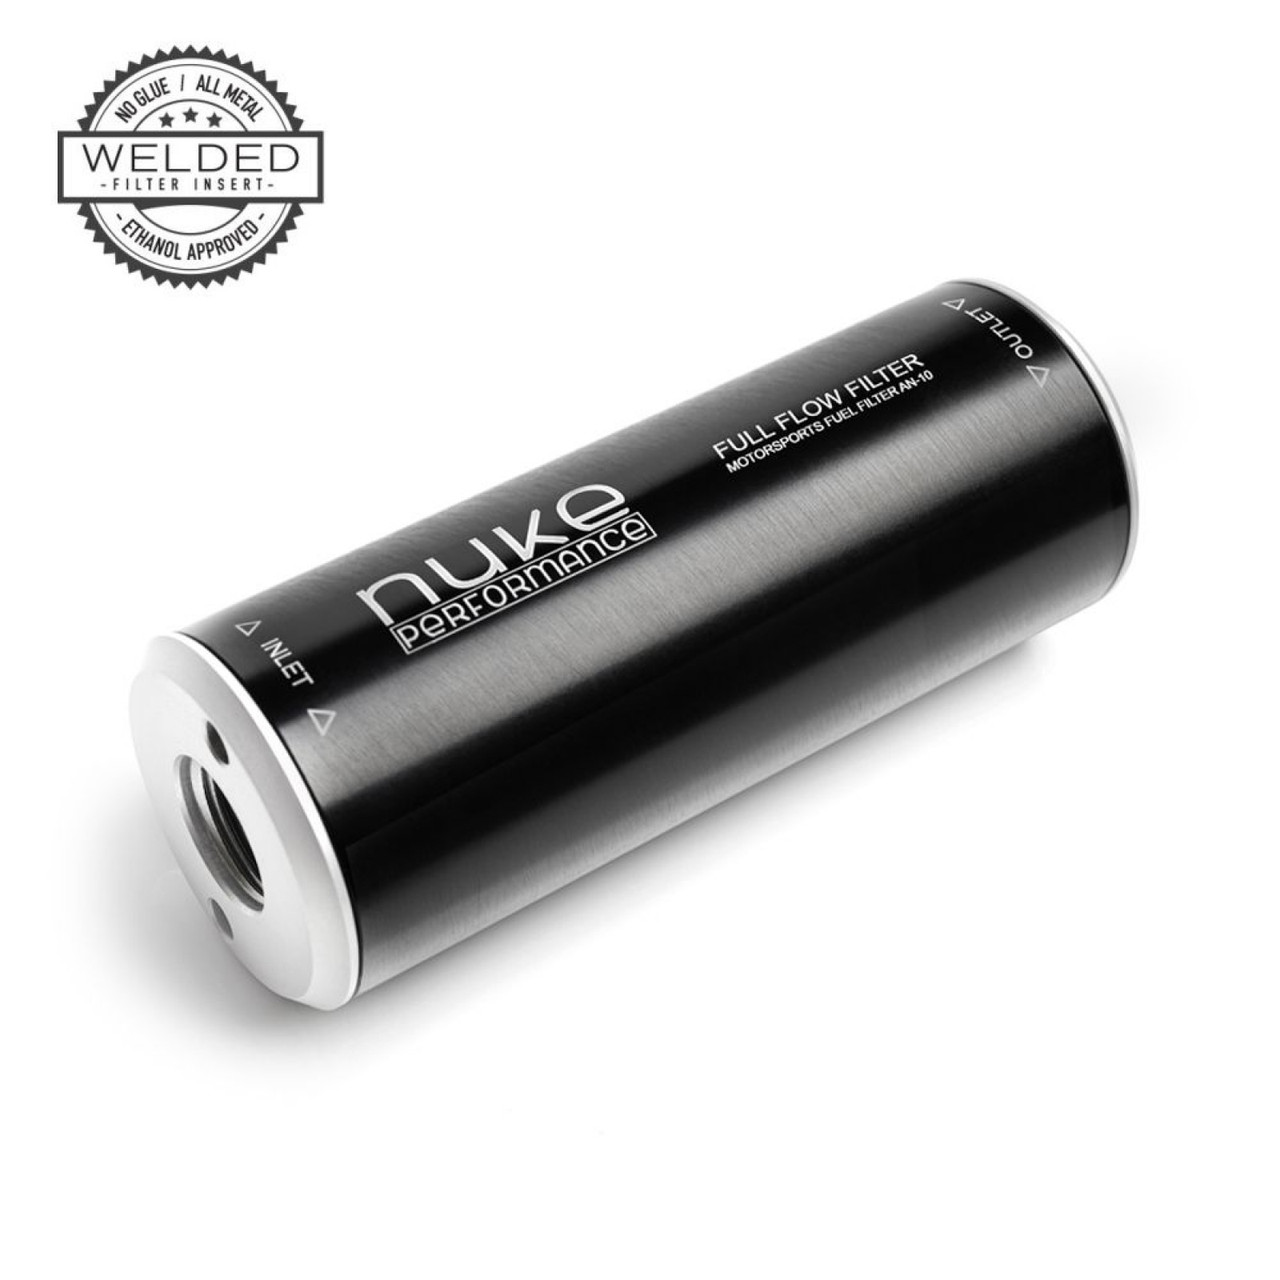 Nuke Performance Fuel Filter Slim 10 micron AN-10 - Welded stainless steel element (NUK-20002203)